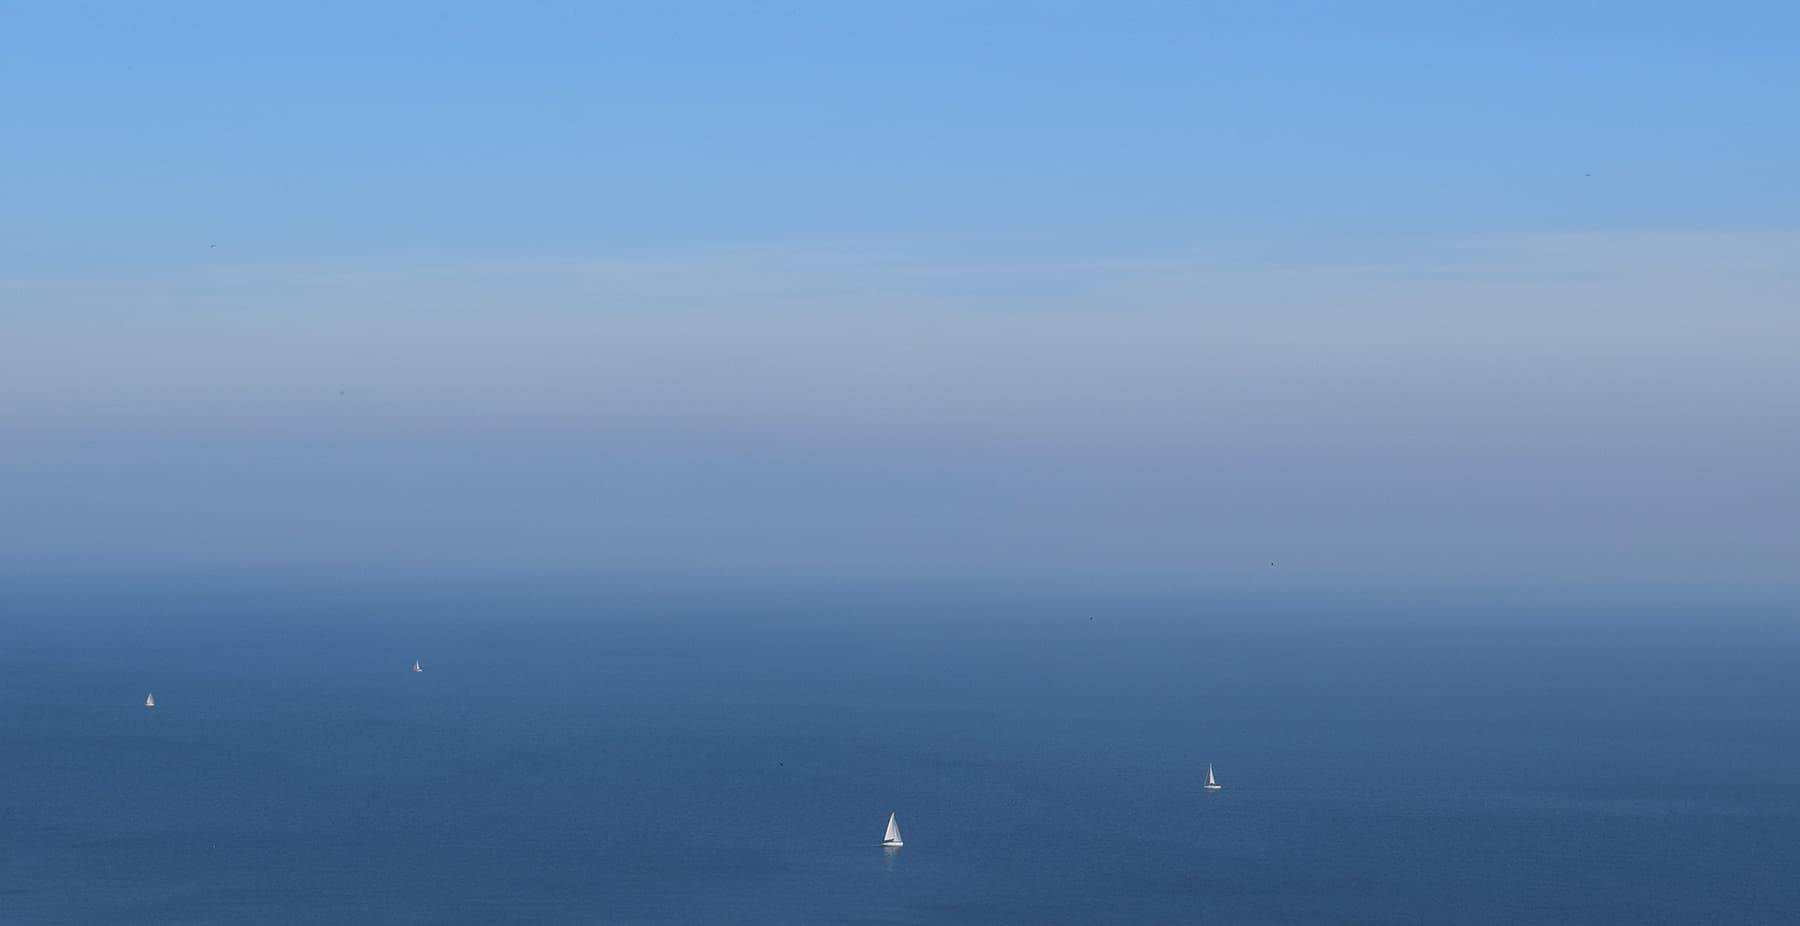 Boats in the open sea